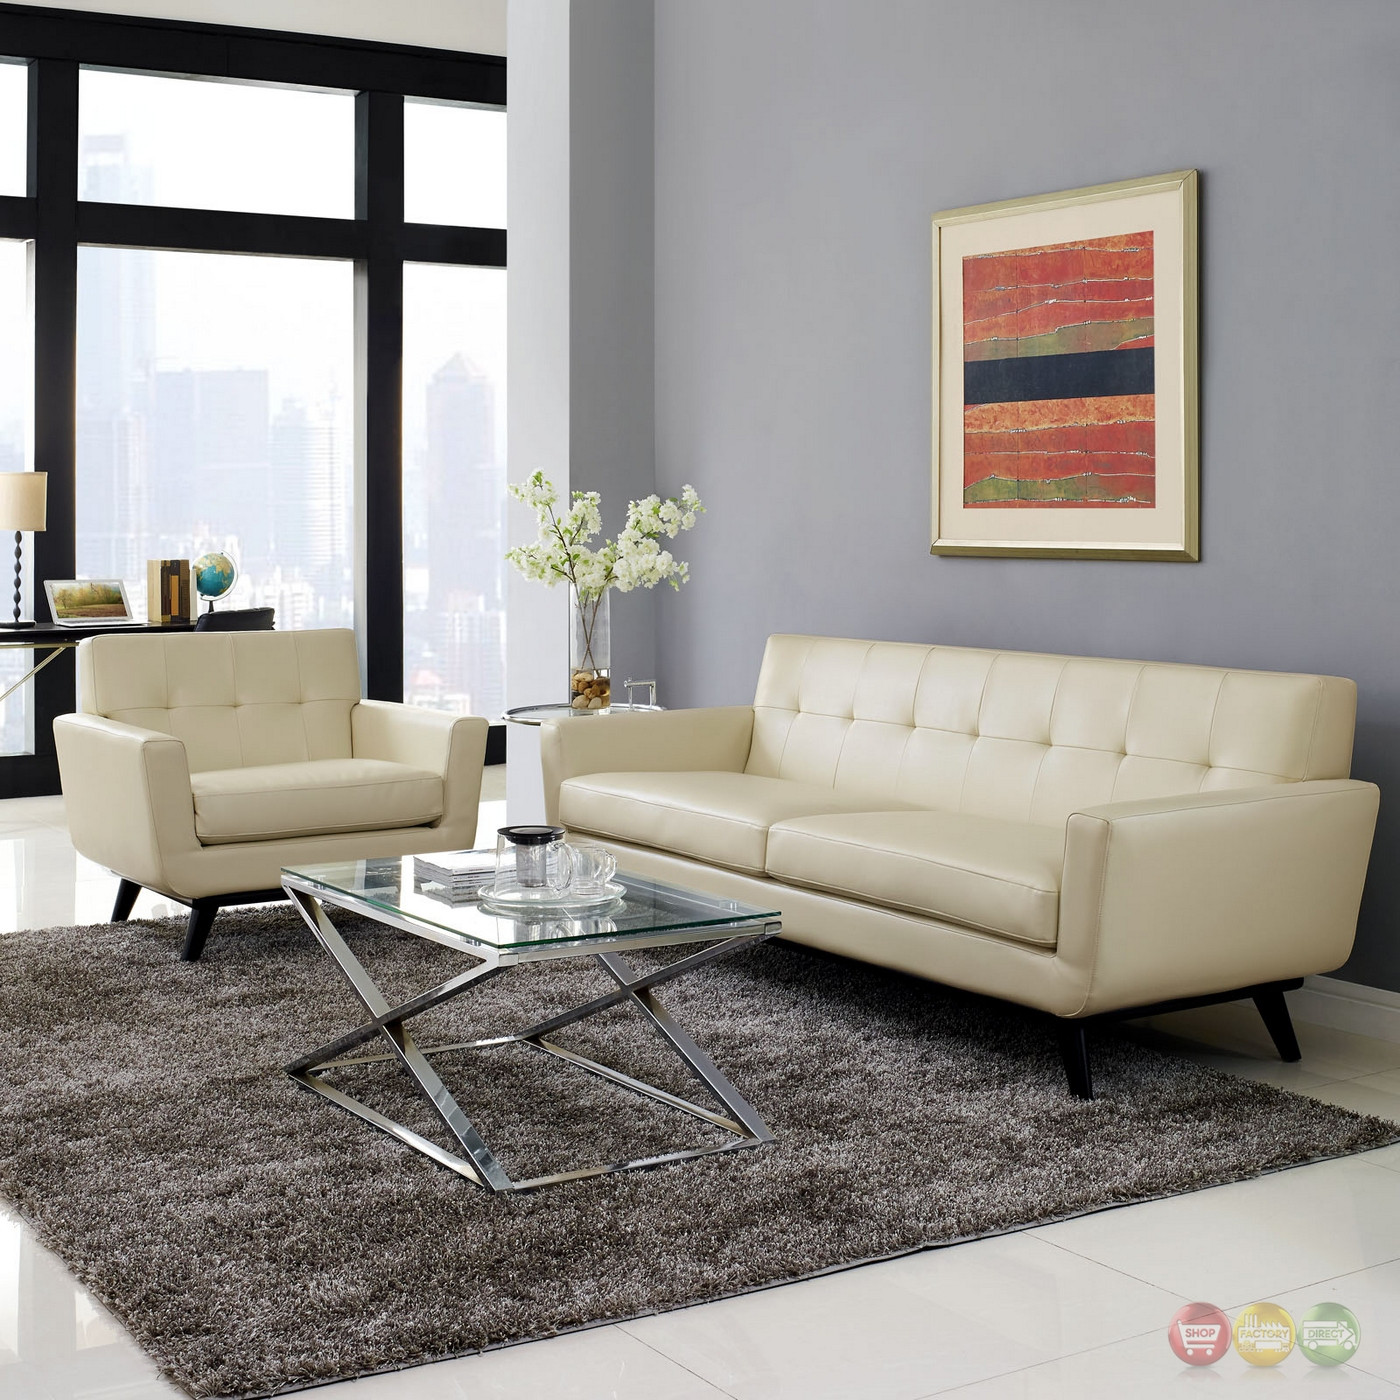 Modern Leather Living Room Set
 Engage Contemporary 2pc Button tufted Leather Living Room